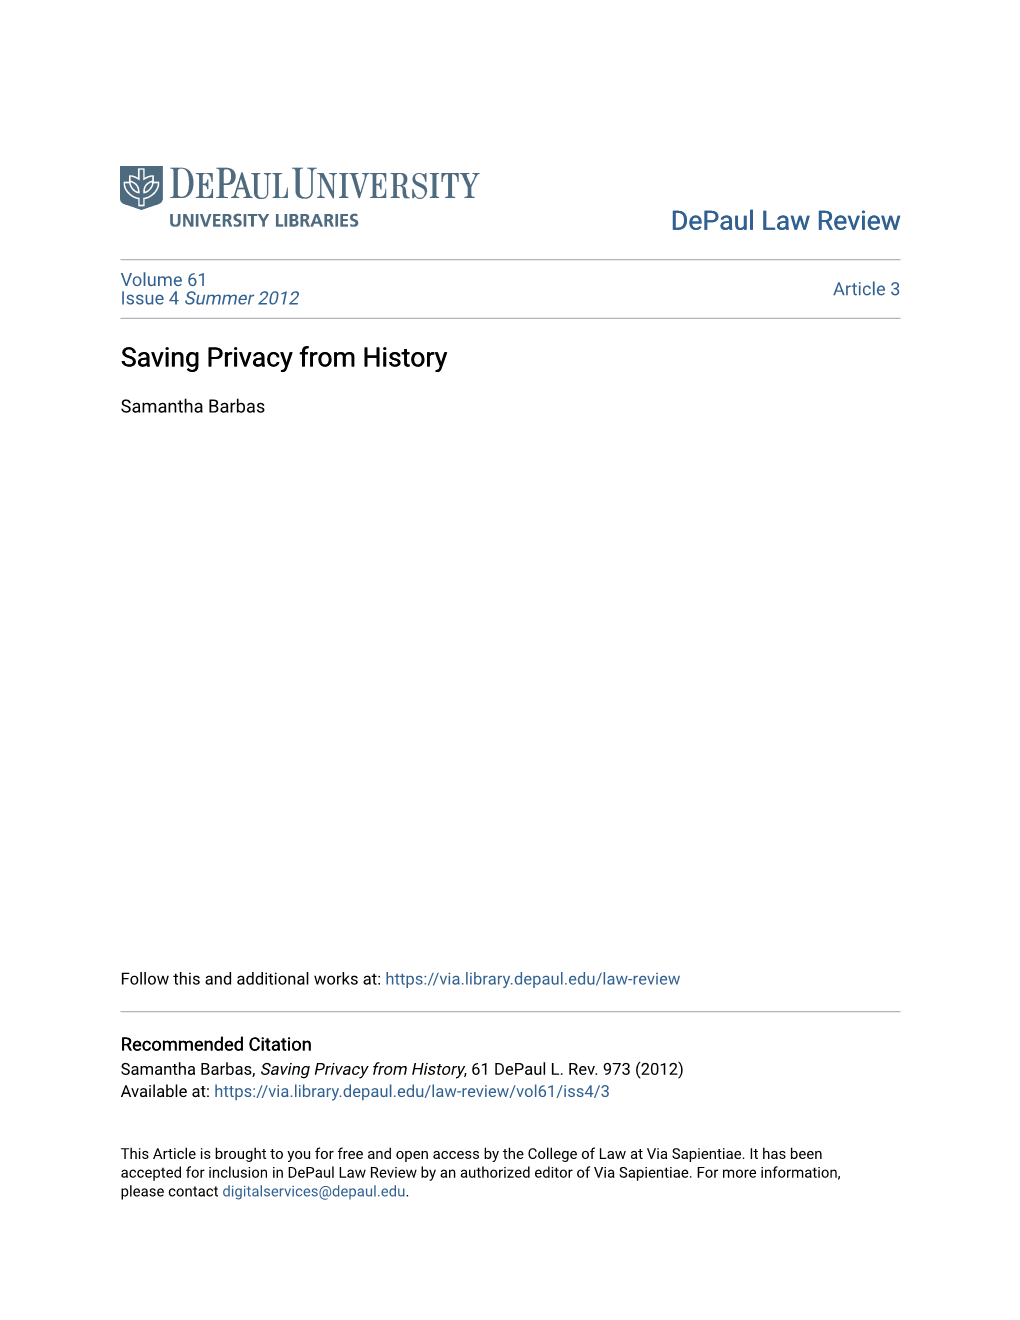 Saving Privacy from History